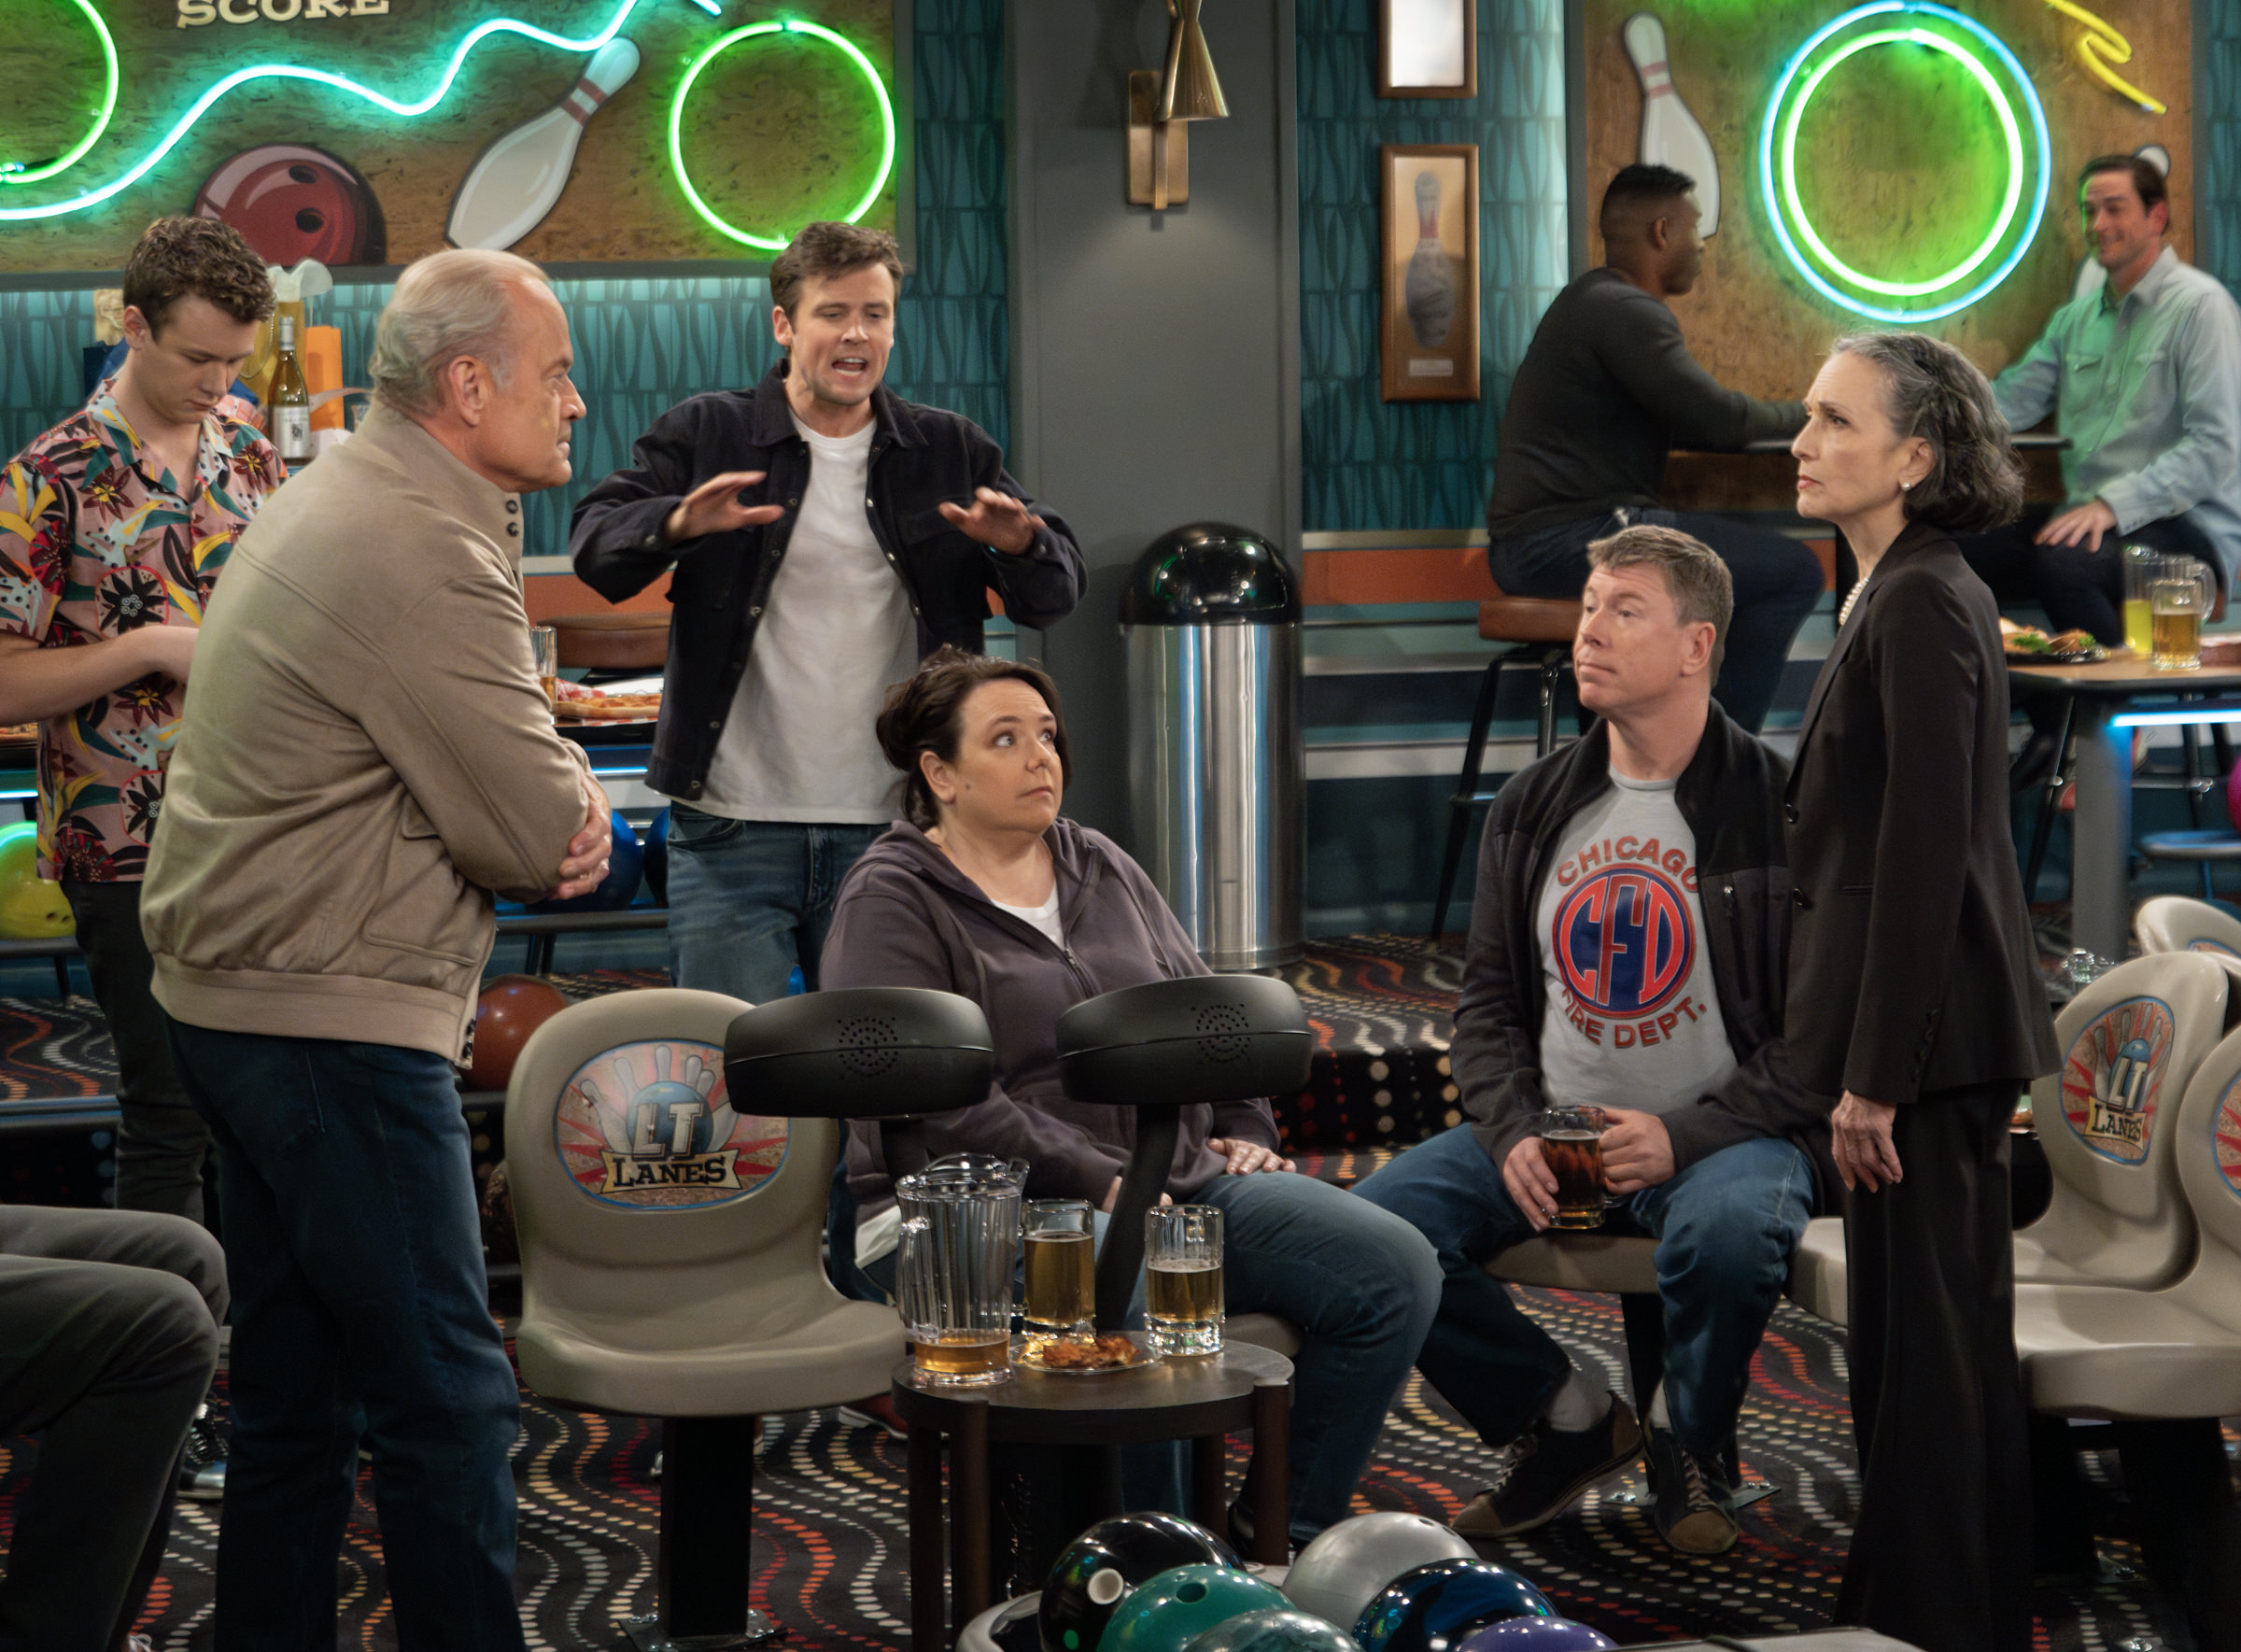 L-R: Anders Keith as David, Kelsey Grammer as Frasier Crane, Jack Cutmore-Scott as Freddy Crane, Renee Pezzotta as Smokey, Jimmy Dunn as Moose and Bebe Neuwirth as  Dr. Lilith Sternin in Frasier, episode 7, season 1 streaming on Paramount+, 2023.   Photo credit: Chris Haston/Paramount+